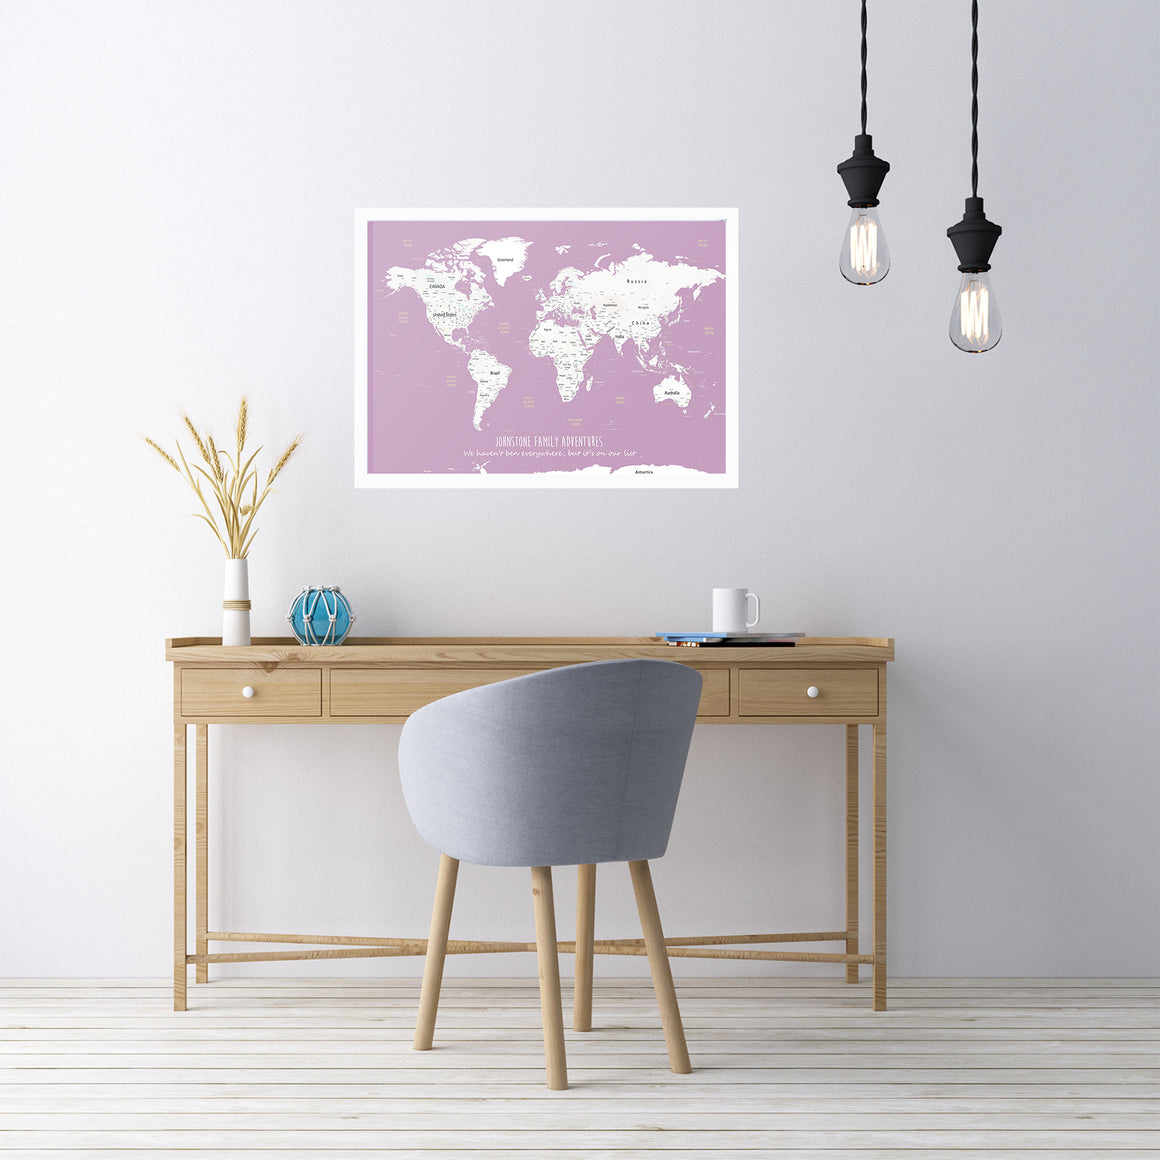 Personalised Map, World Map Pin Board, Framed World Map, Custom Travel Map, World Map Wall Art, Framed Pin Board, Travel Map Pin Board, Wedding Gift map, Couples Gift, World Map Art, World Travel Map, Push Pin Travel Map, Framed Push Pin Map